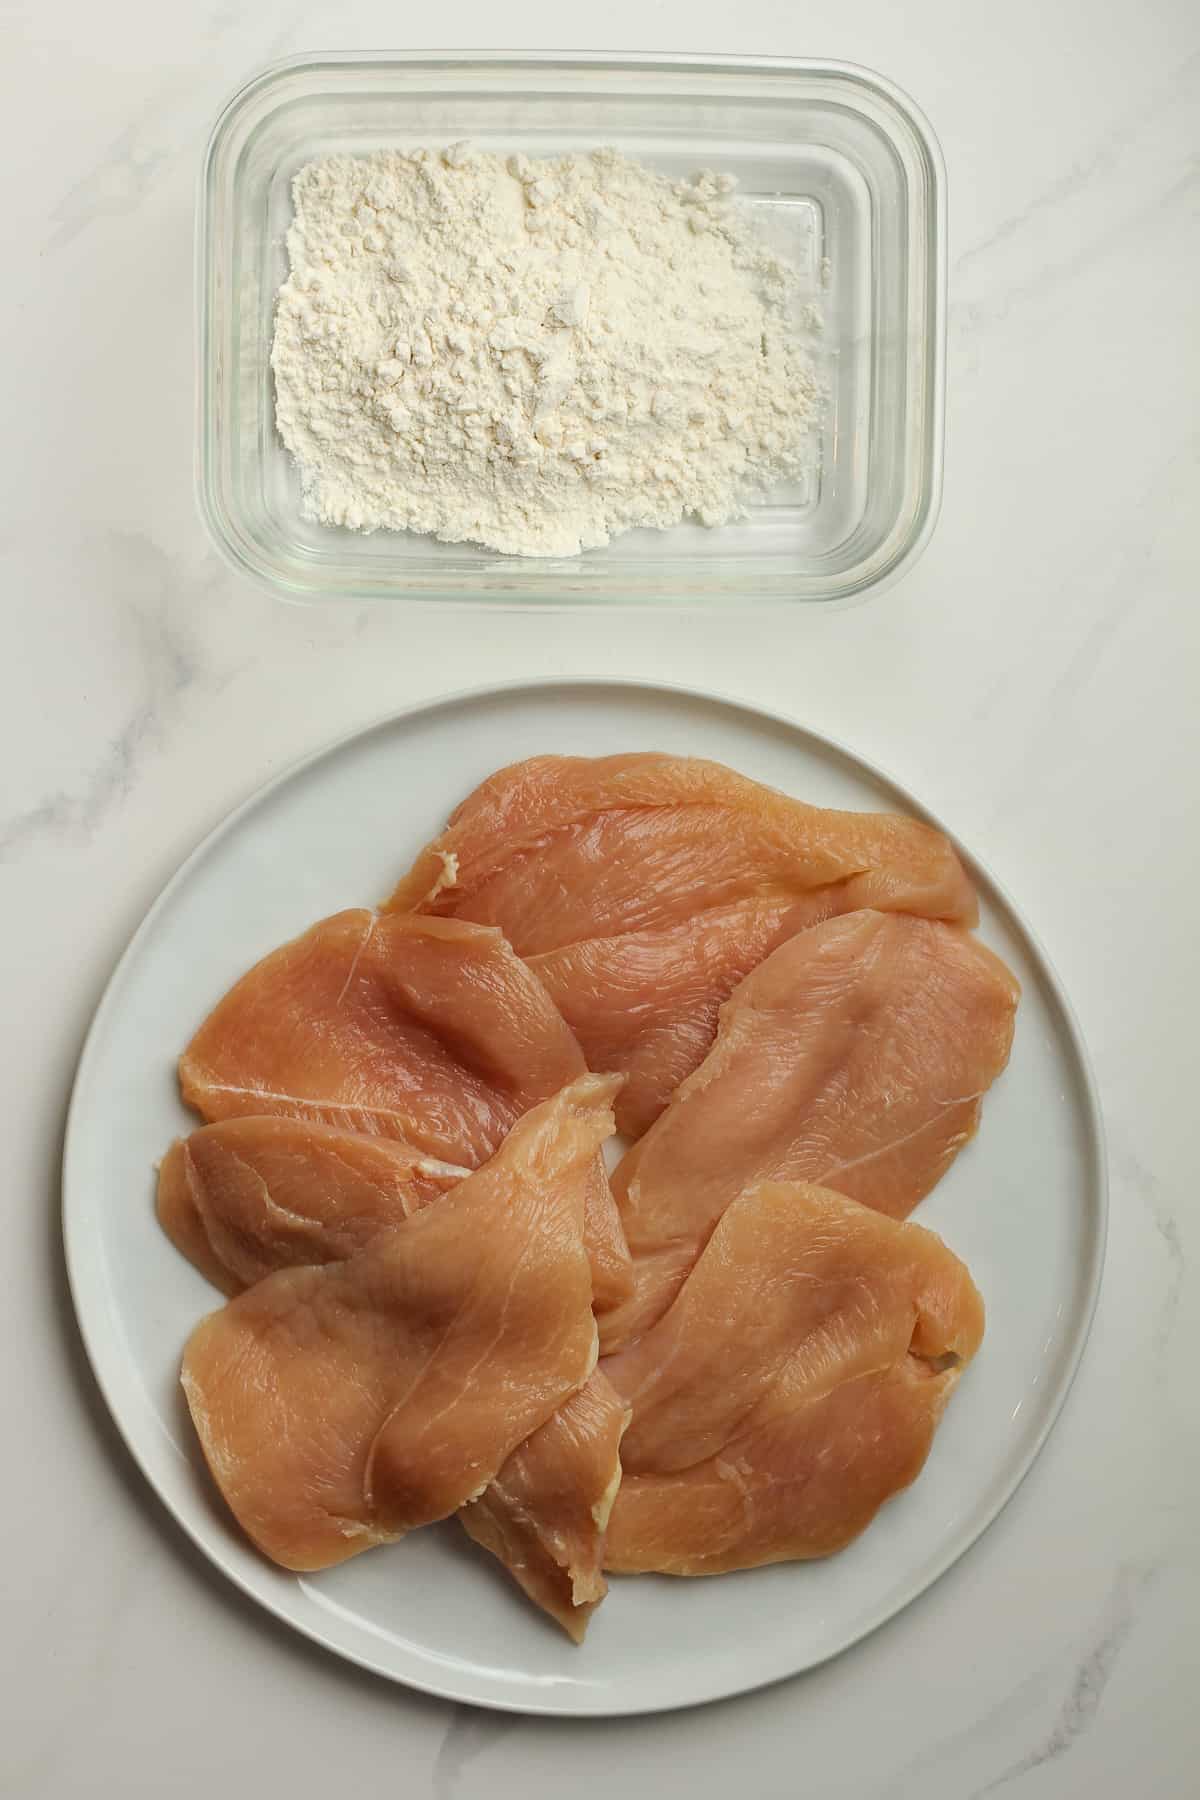 A plate of chicken breasts with a bowl of flour.